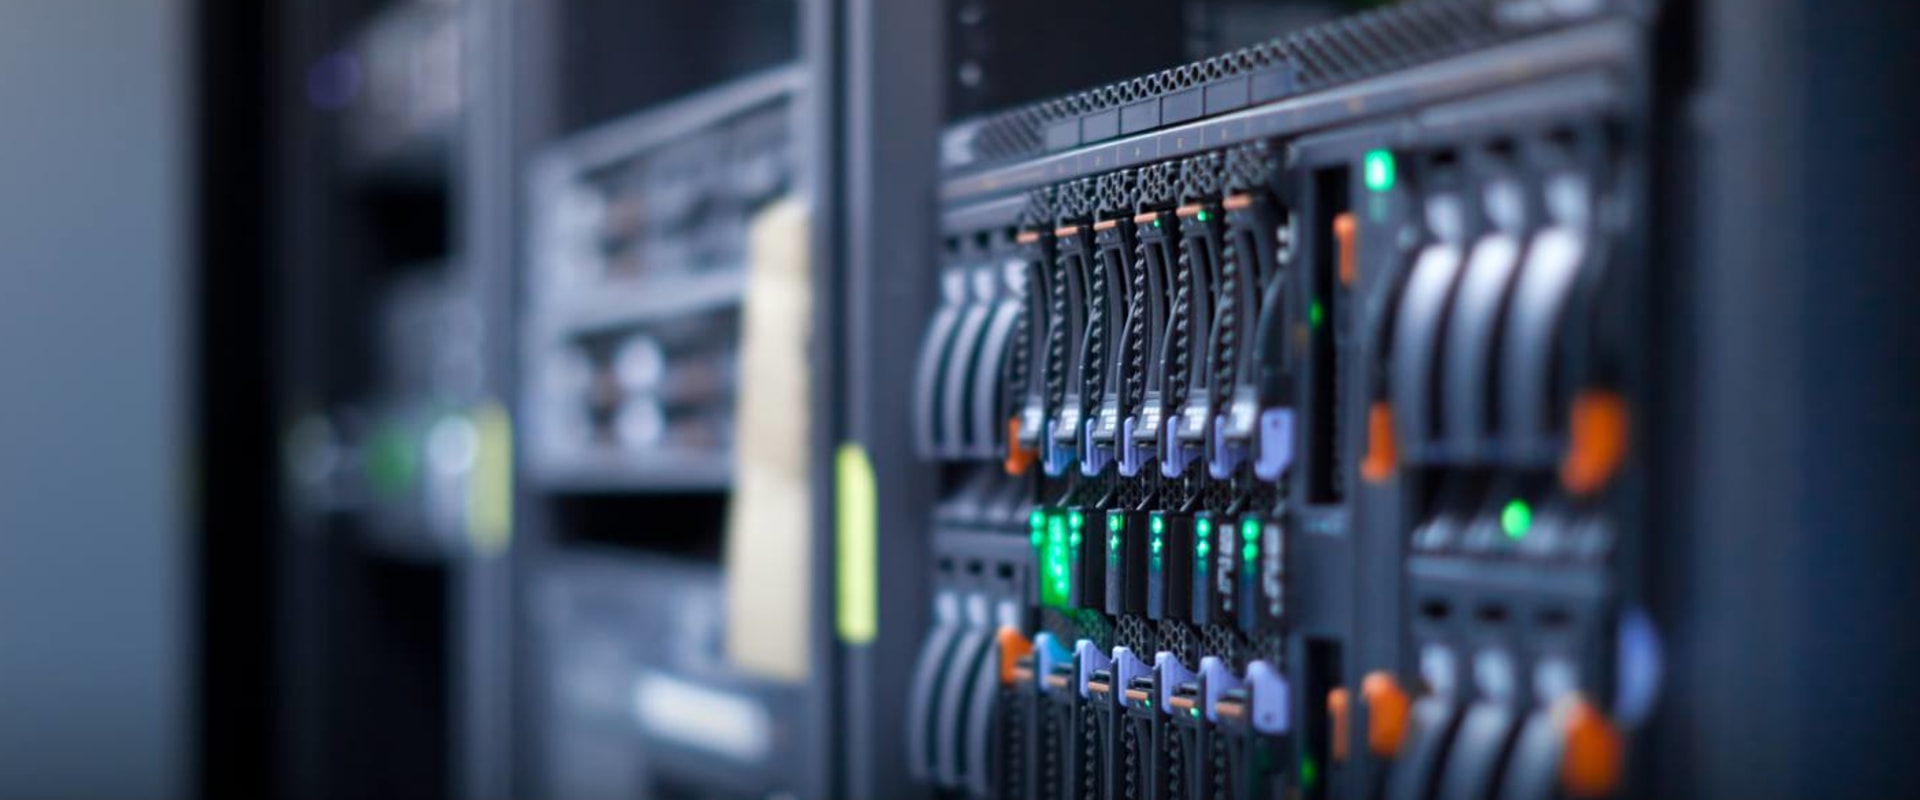 What are the advantages of dedicated hosting services?